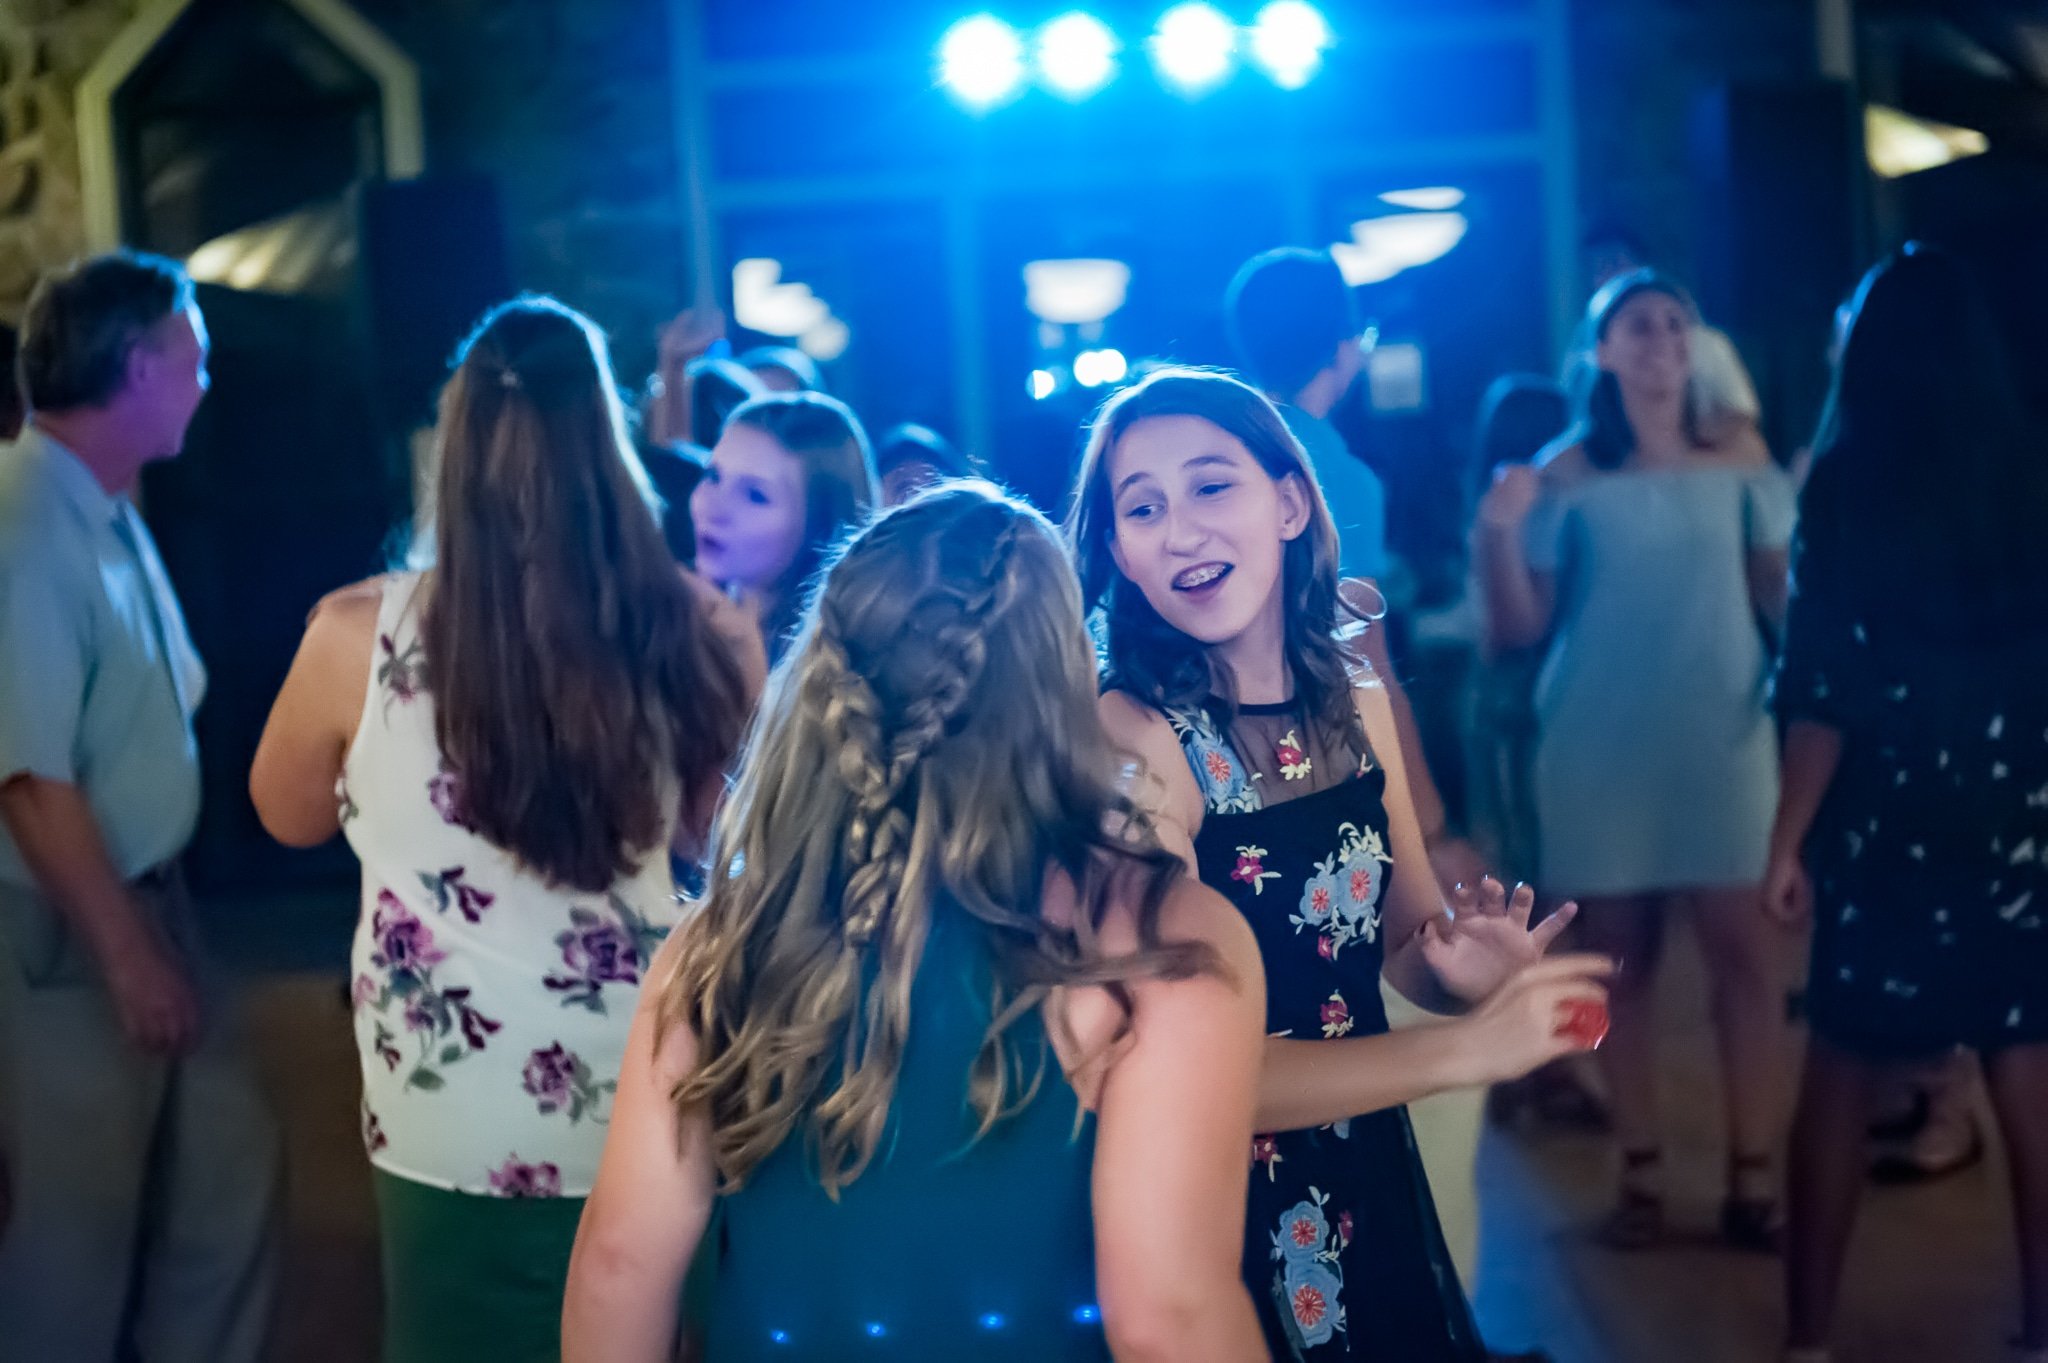 Two young women dance together during a mitzvah celebration.